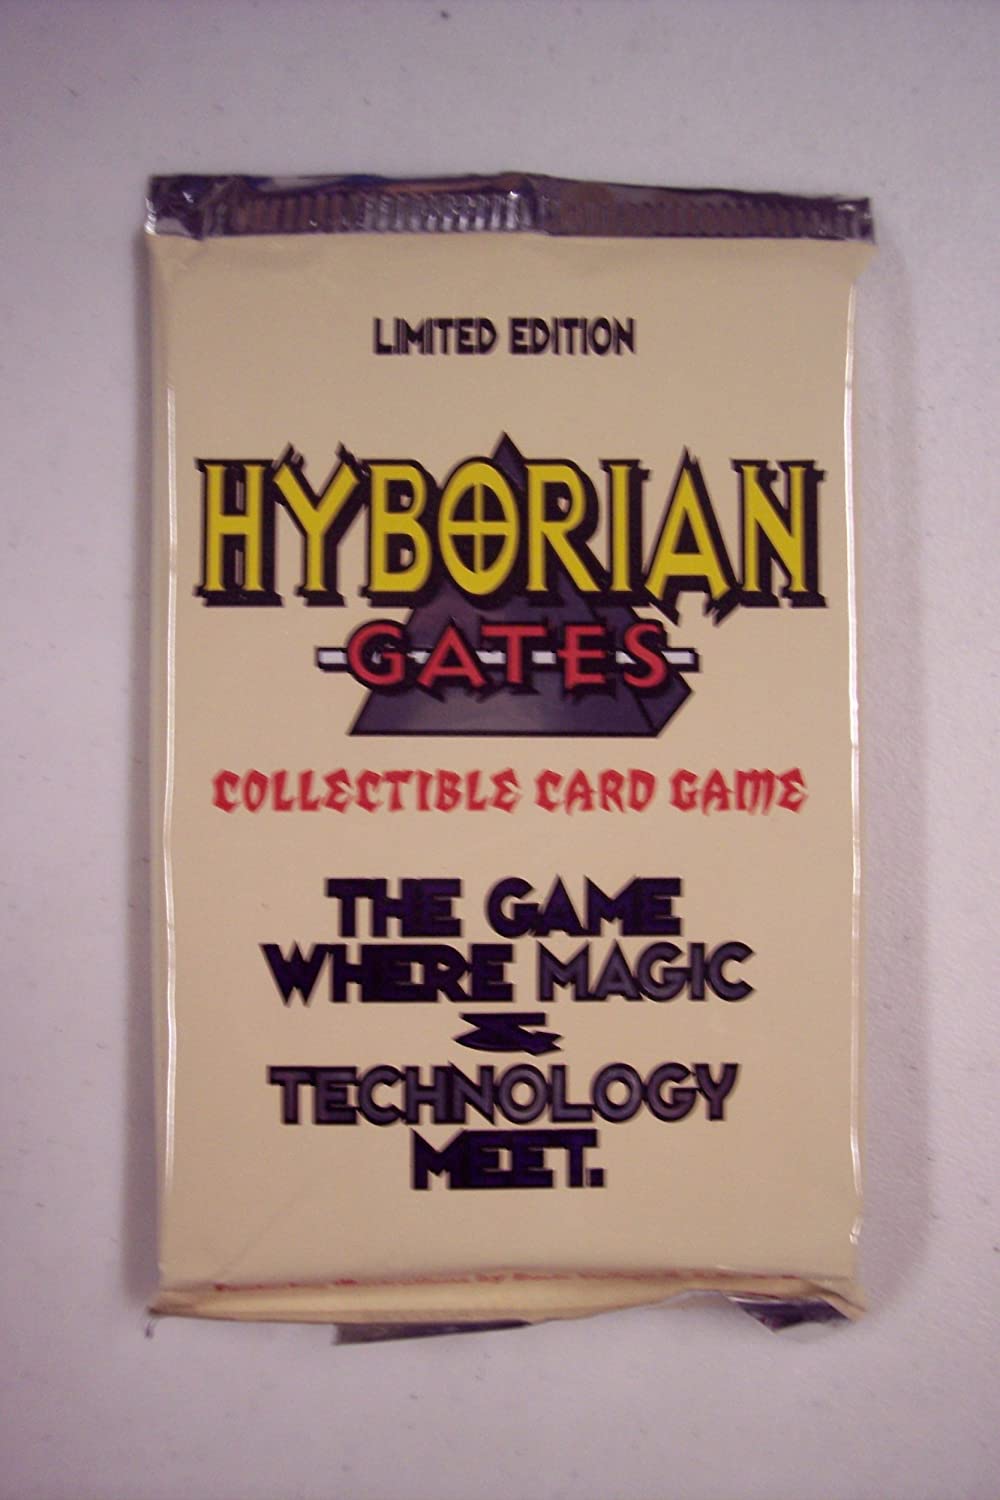 Hyborian Gates Collectible Card Game Booster Pack (Limited Edition) | L.A. Mood Comics and Games